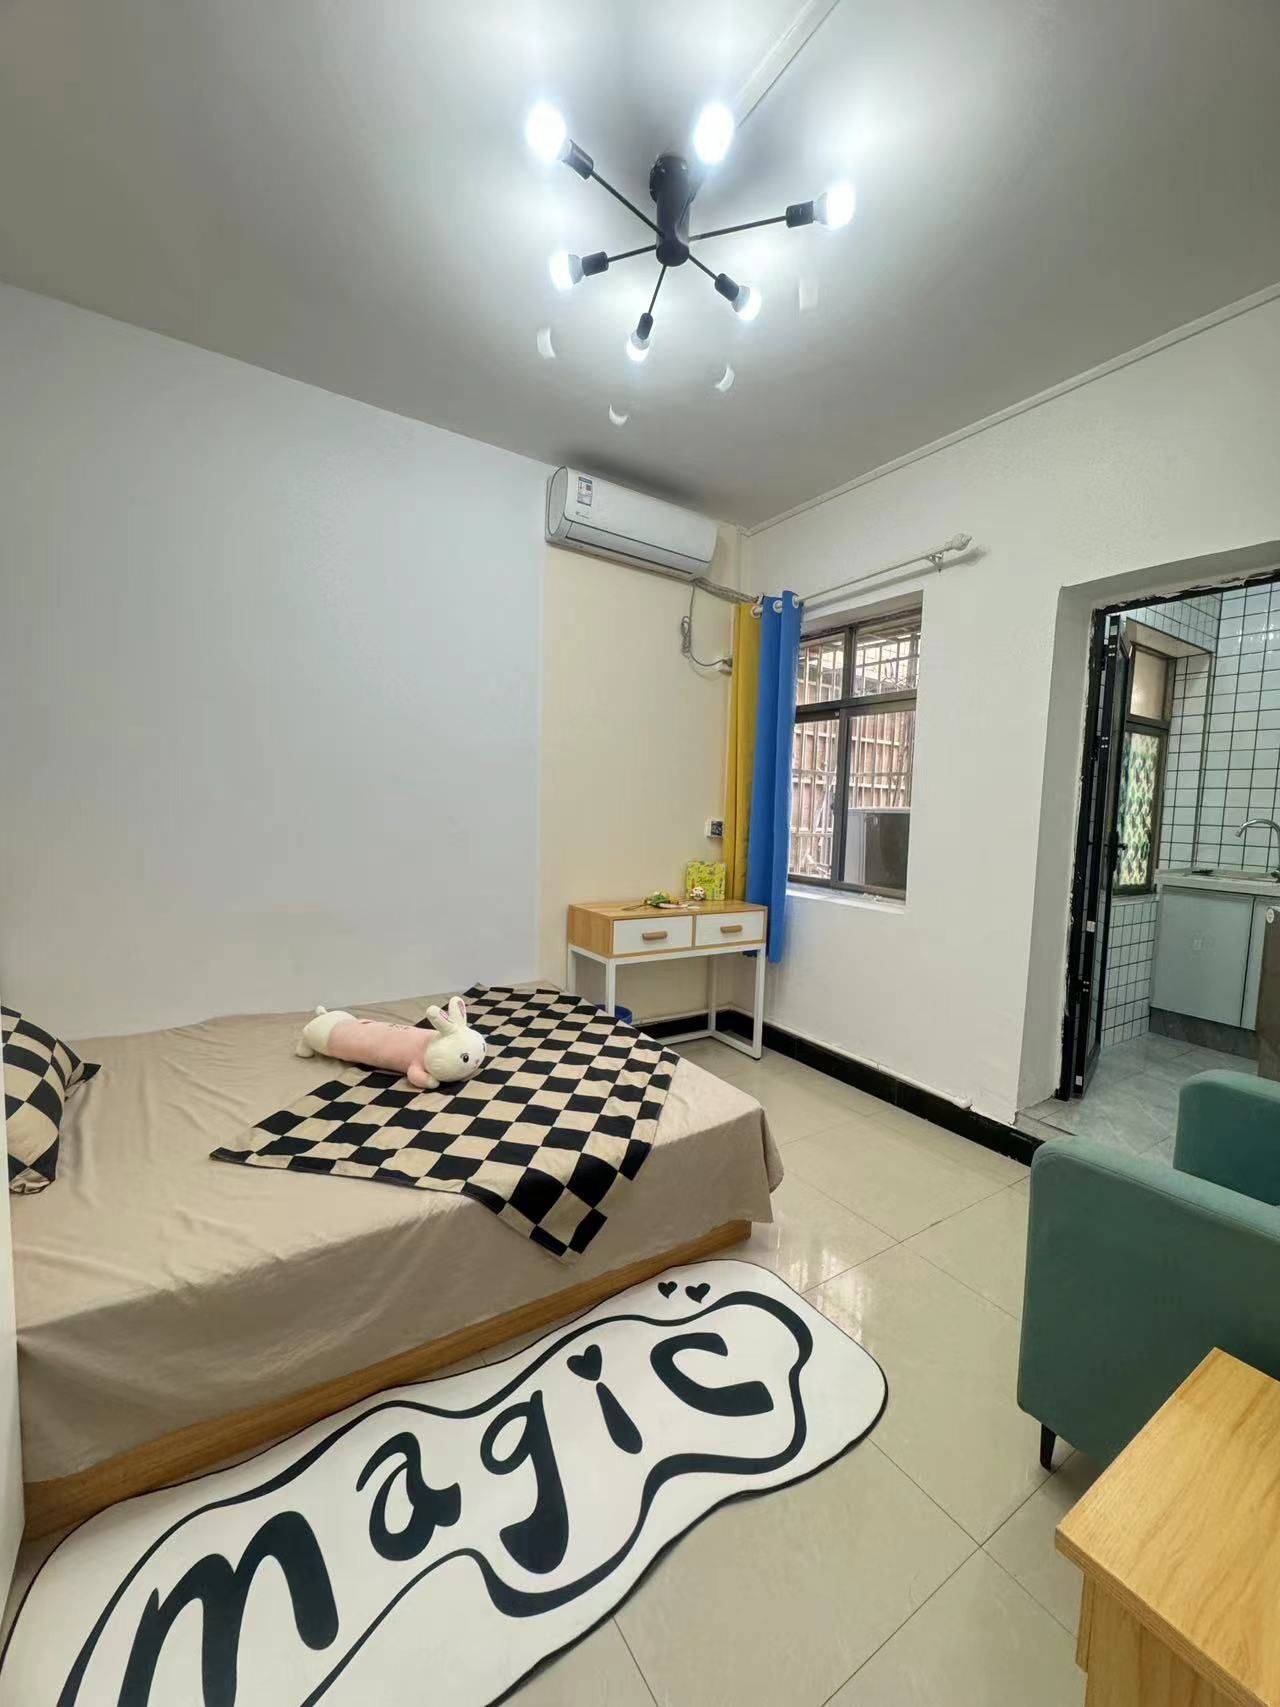 Changsha-Tianxin-Cozy Home,Clean&Comfy,No Gender Limit,Chilled